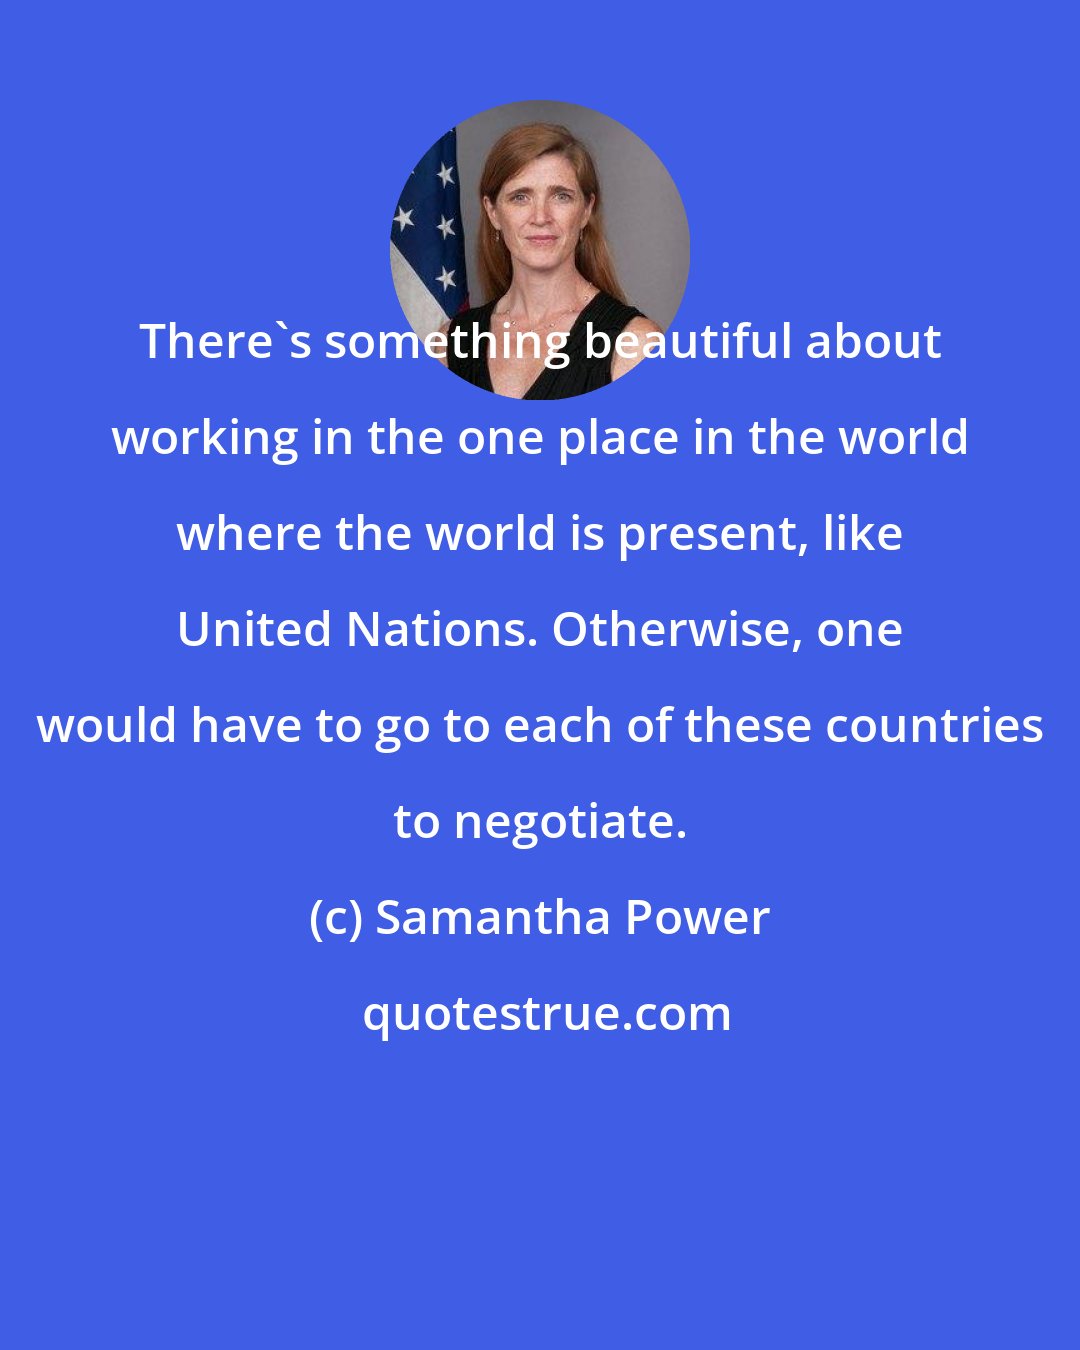 Samantha Power: There's something beautiful about working in the one place in the world where the world is present, like United Nations. Otherwise, one would have to go to each of these countries to negotiate.